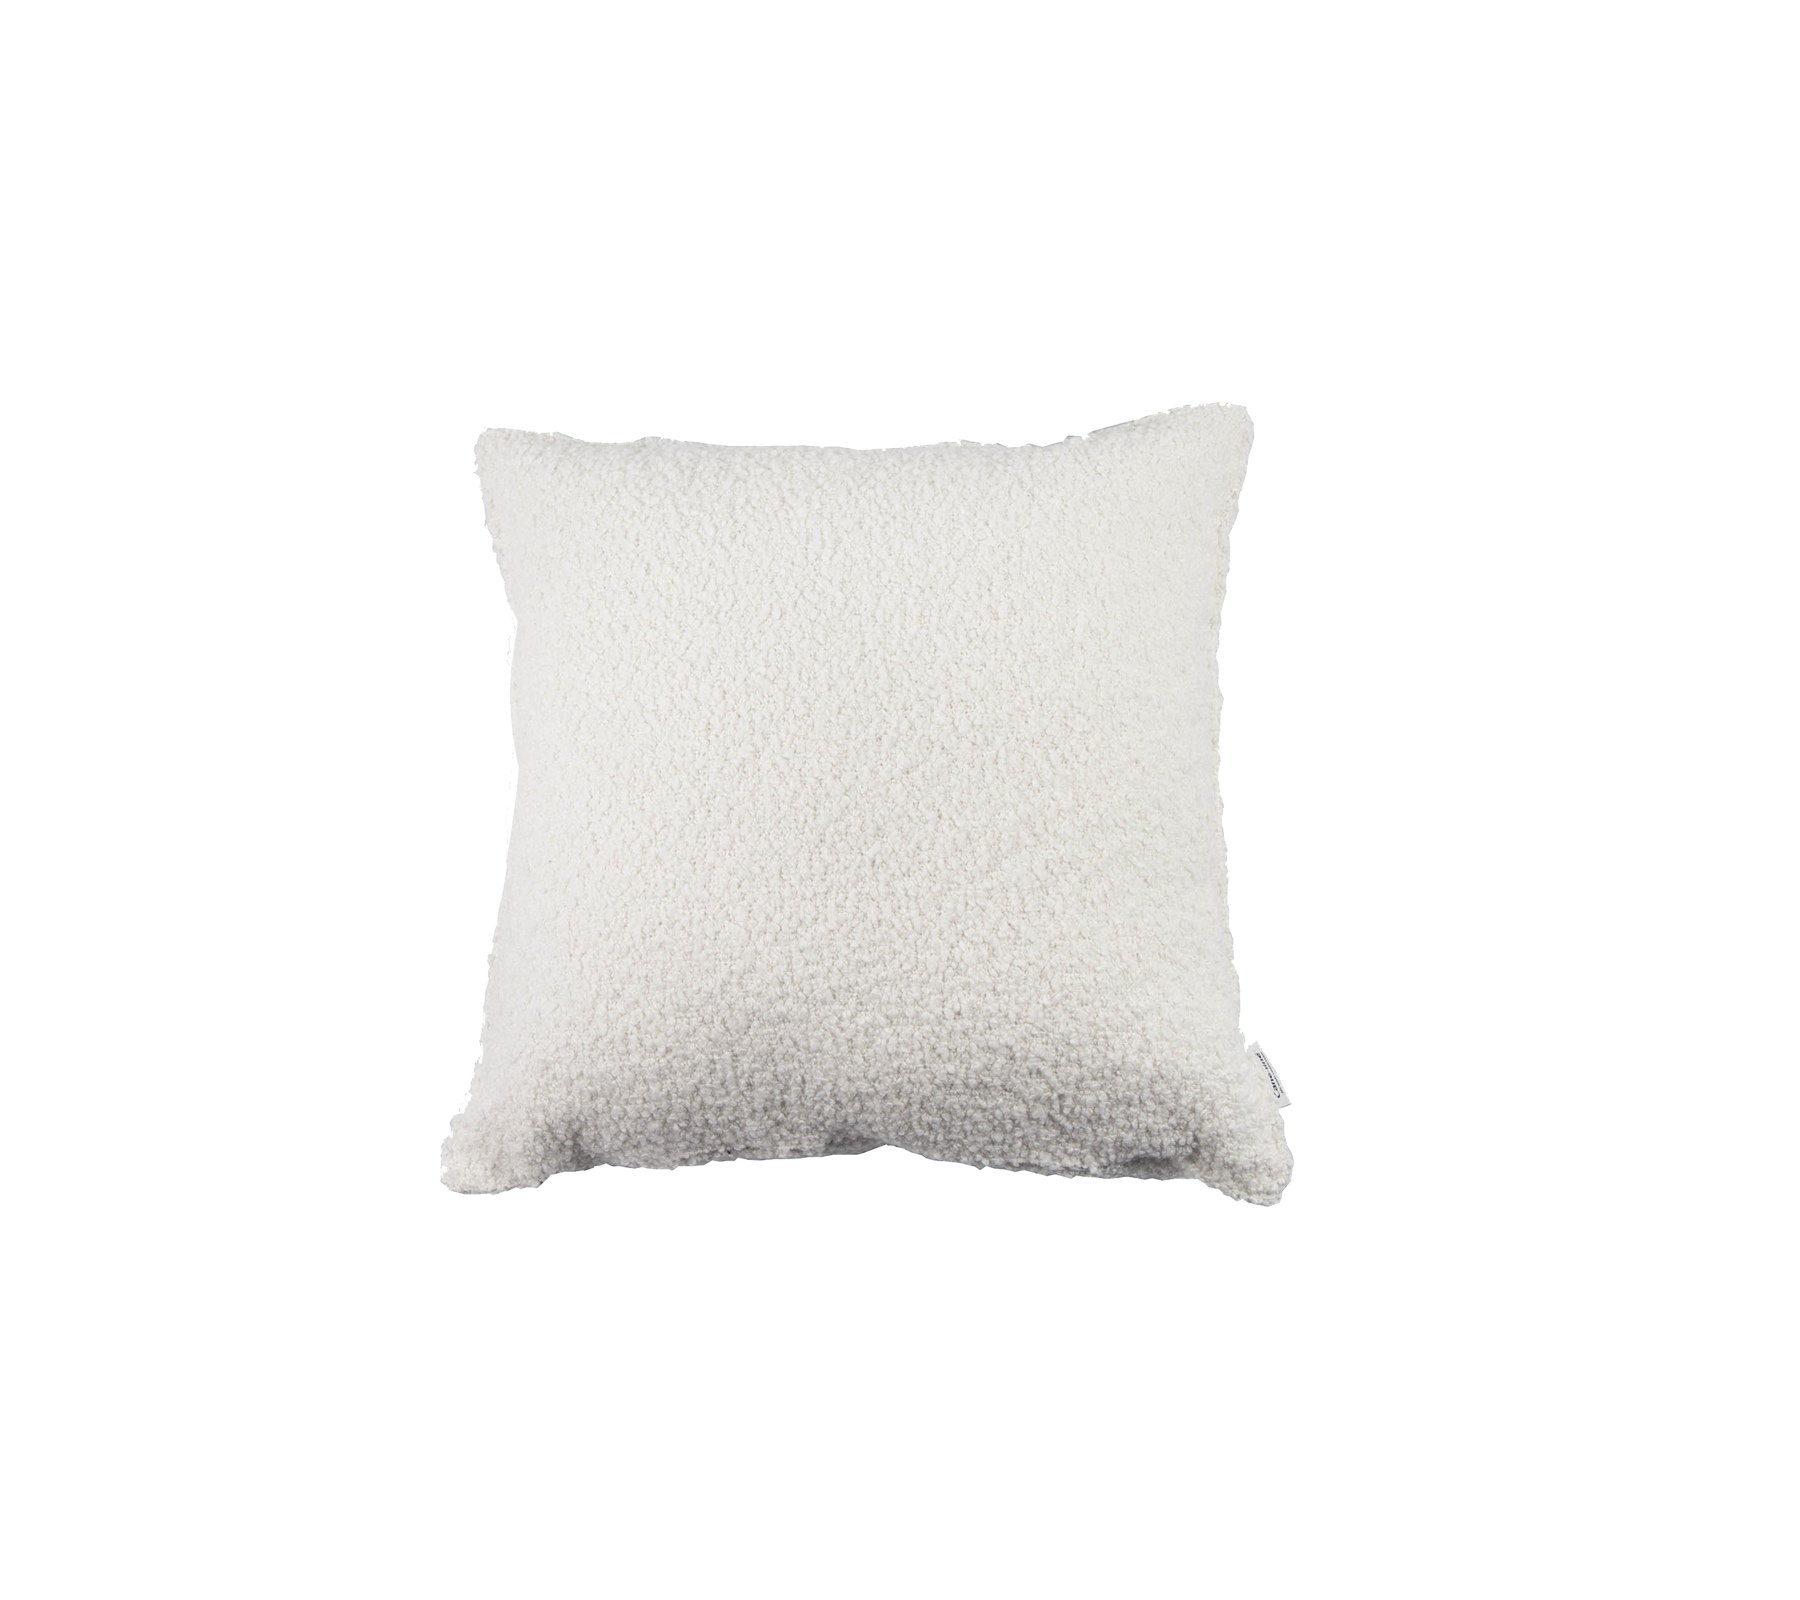 Cane-line - Scent scatter cushion, 50x50 cm - SCI50X50Y150X